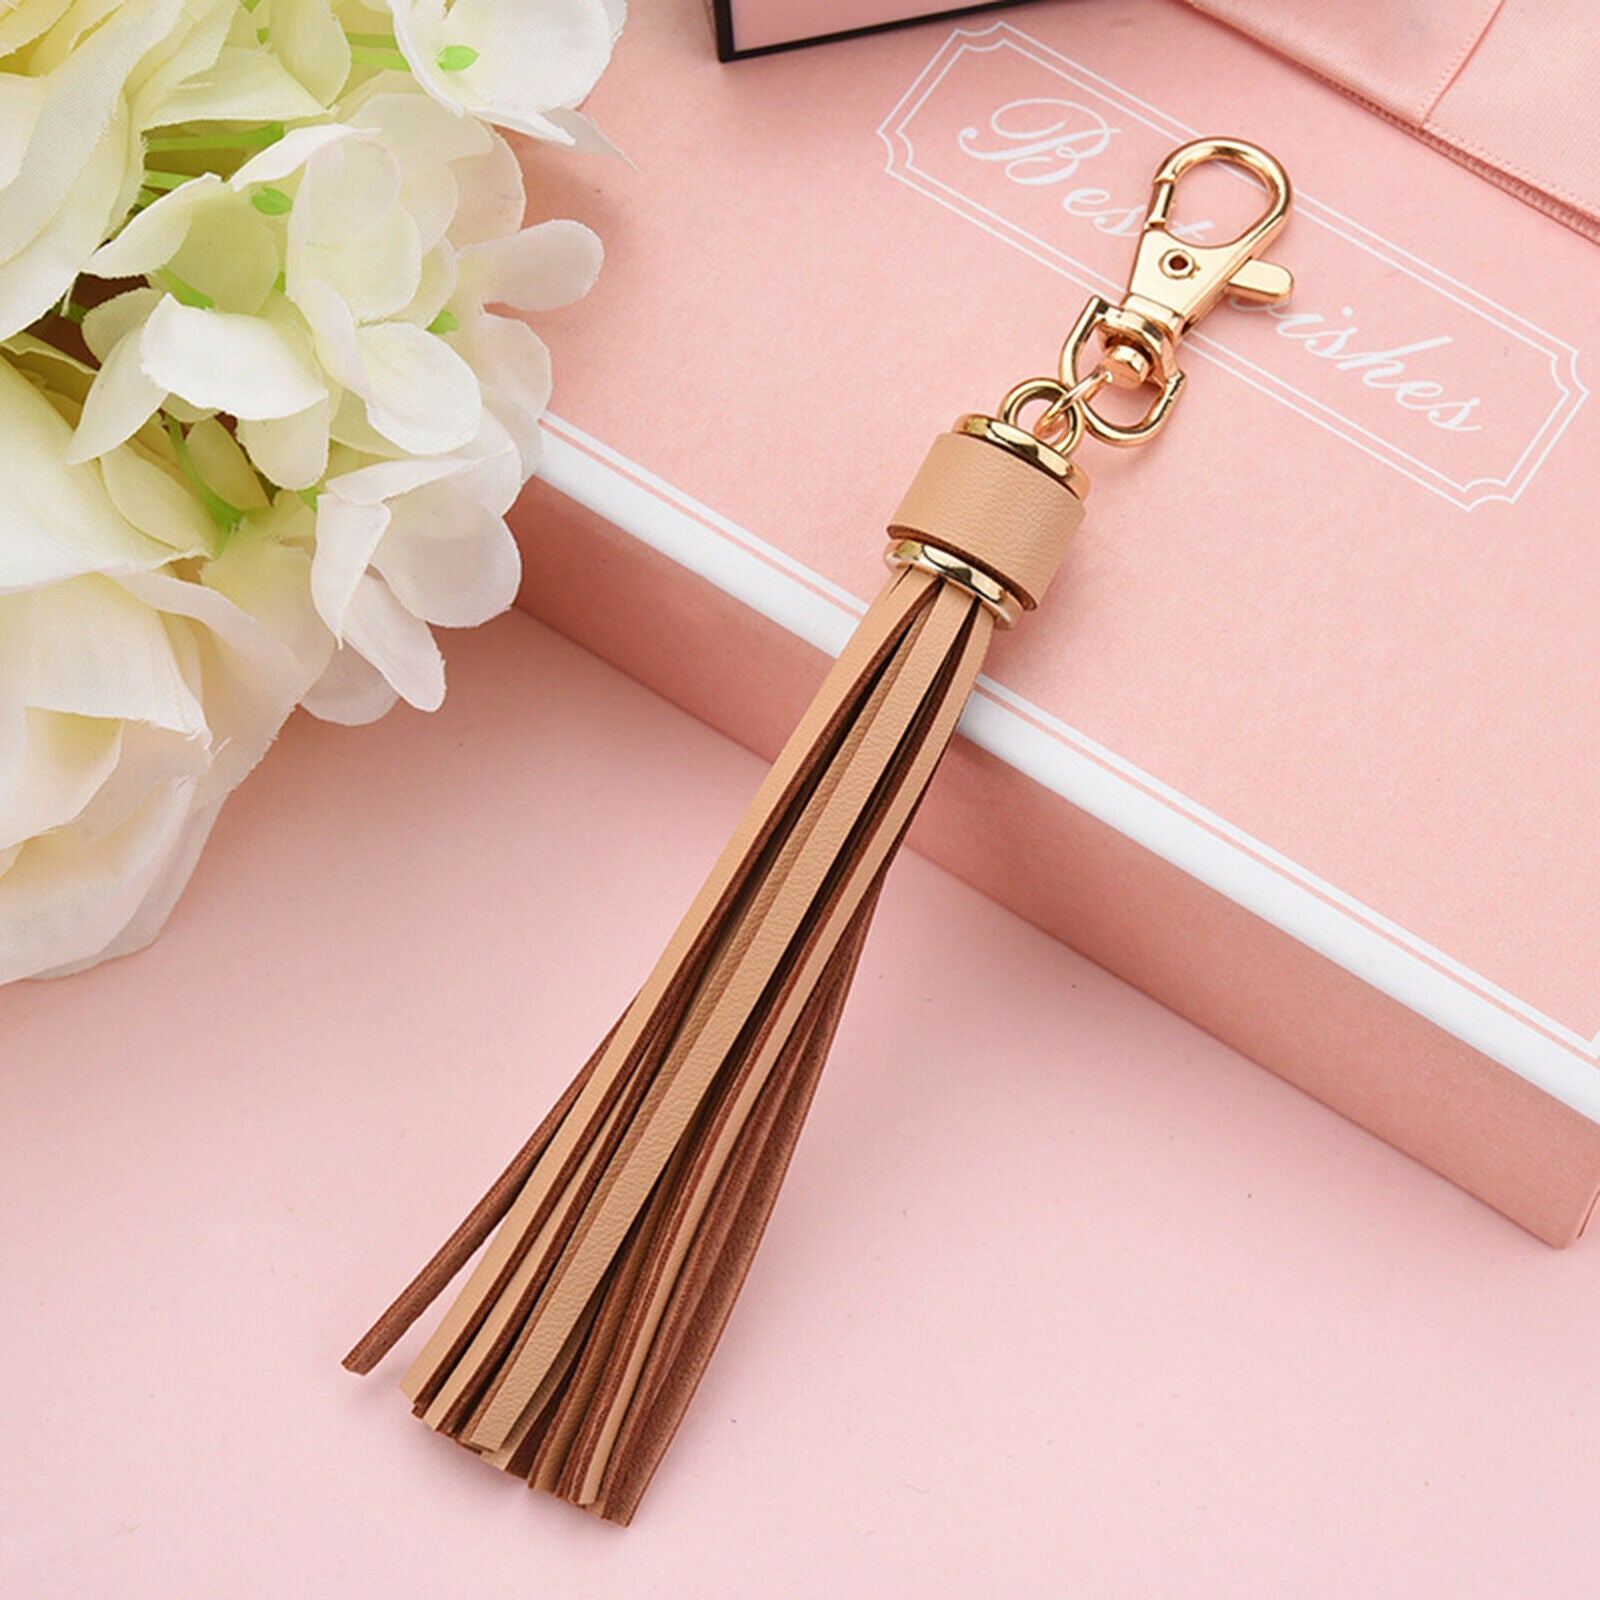 10Pcs Leather Tassels Keychain for Handbags Wallets Crafts Jewelry Making